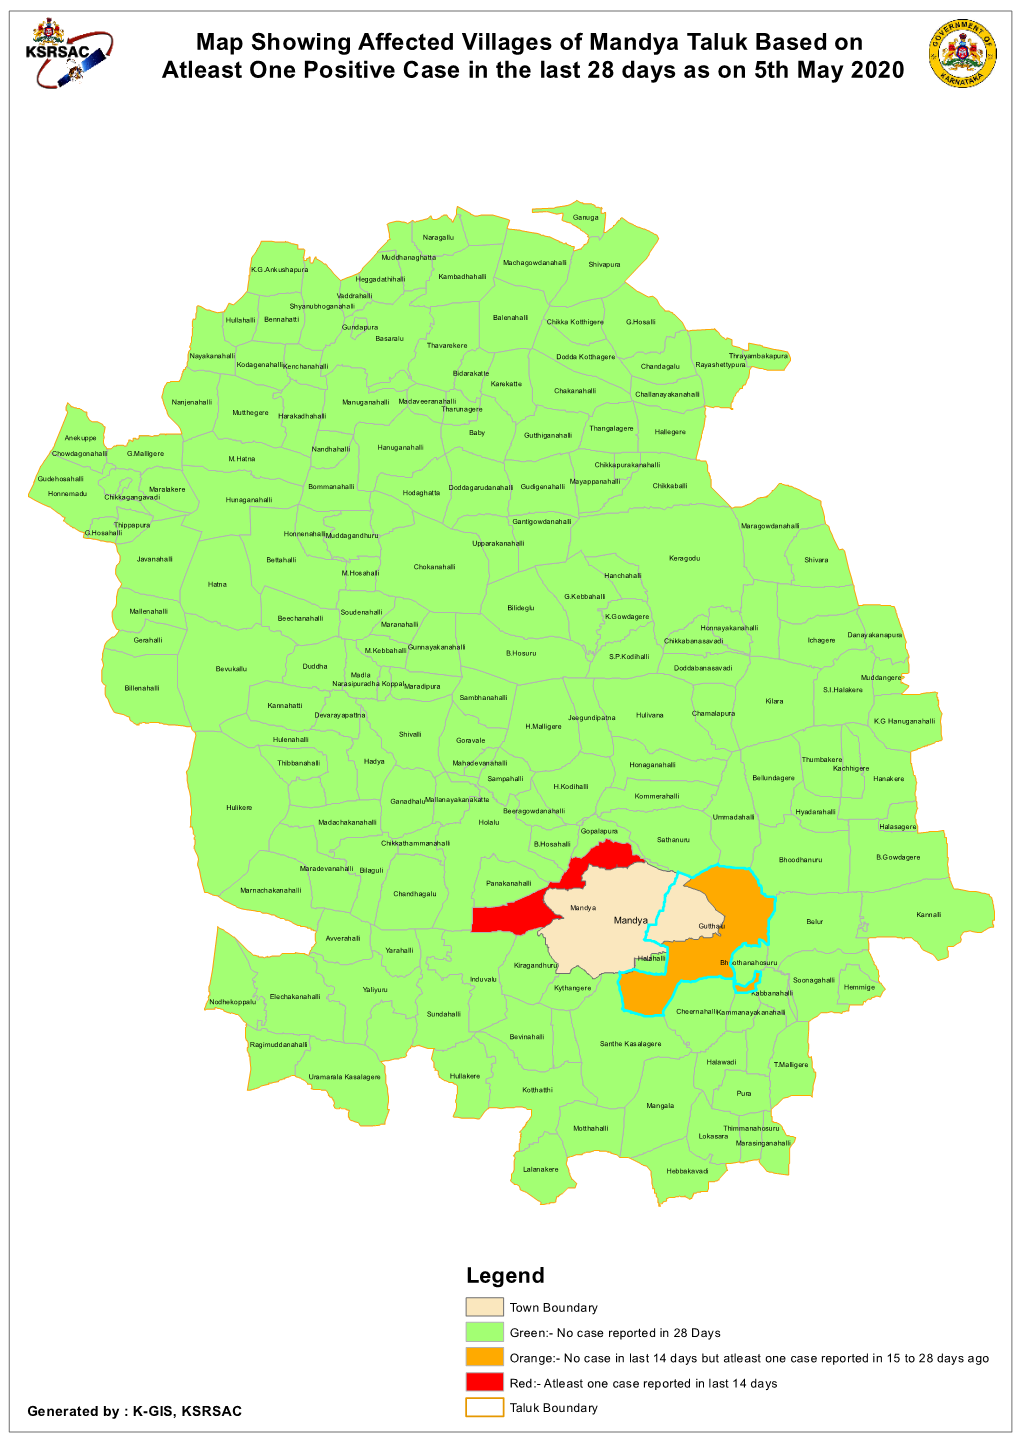 Map Showing Affected Villages of Mandya Taluk Based on Atleast One Positive Case in the Last 28 Days As on 5Th May 2020